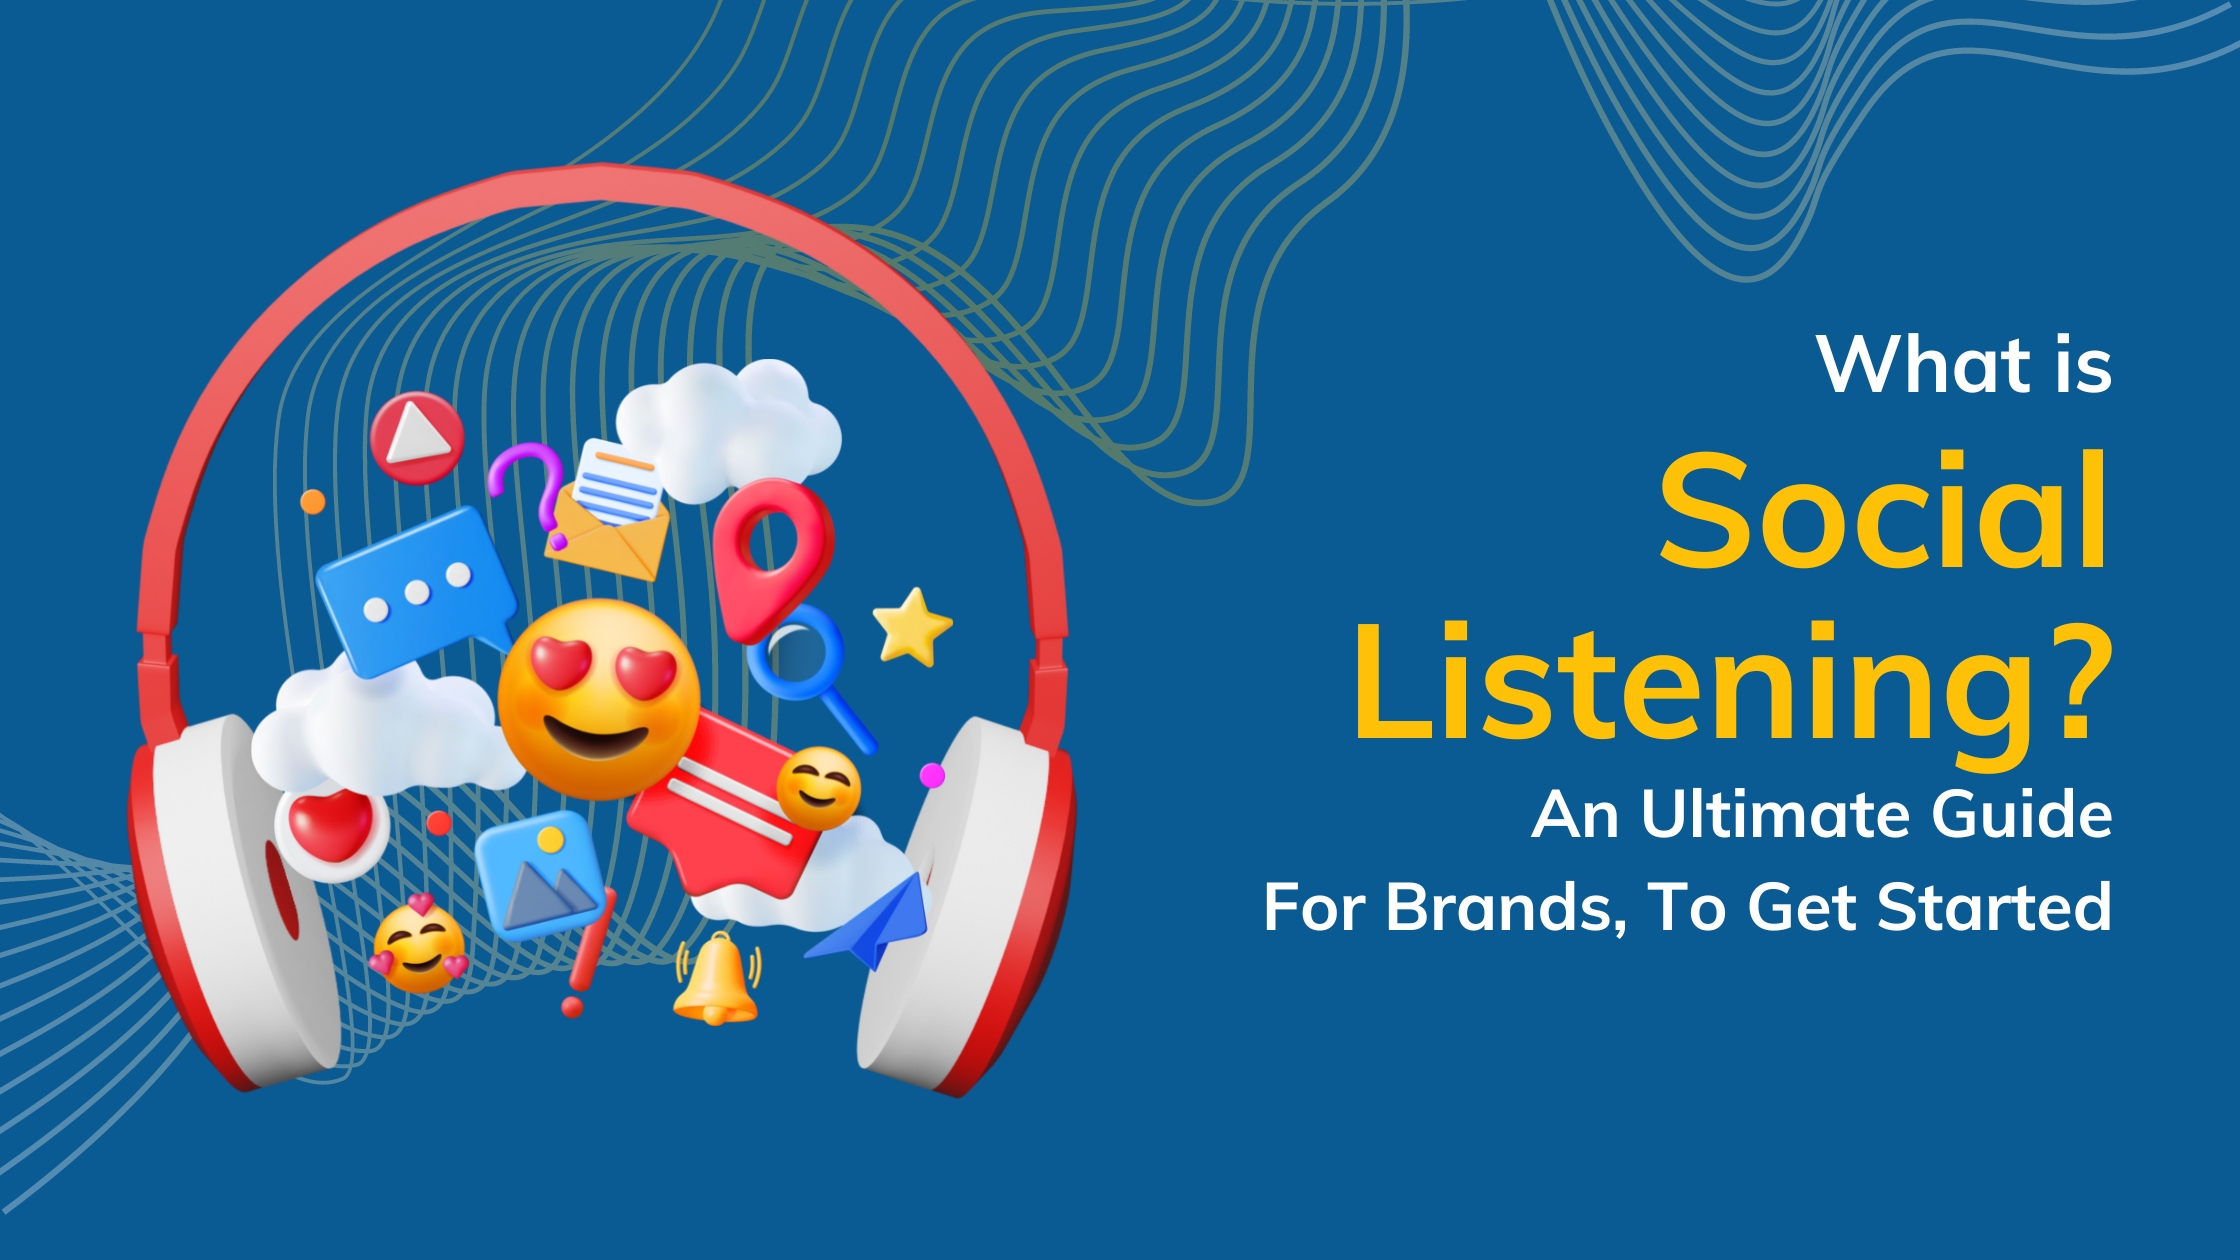 What is Social Listening? An Ultimate Guide For Brands, To Get Started